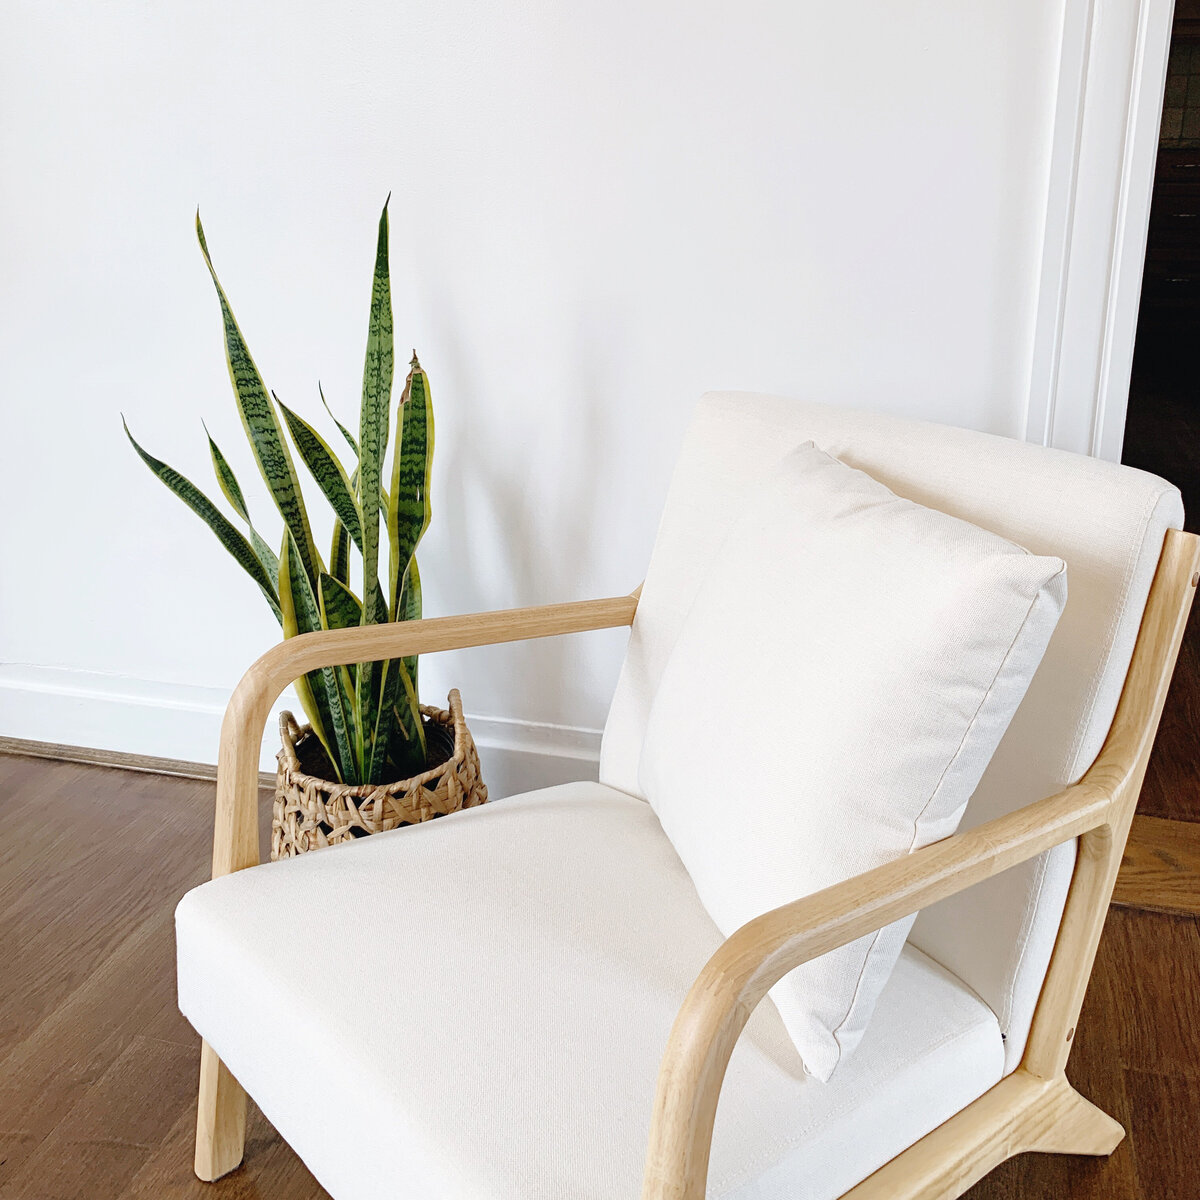 White arm chair with natural wood frame along with snake plant sitting nearby